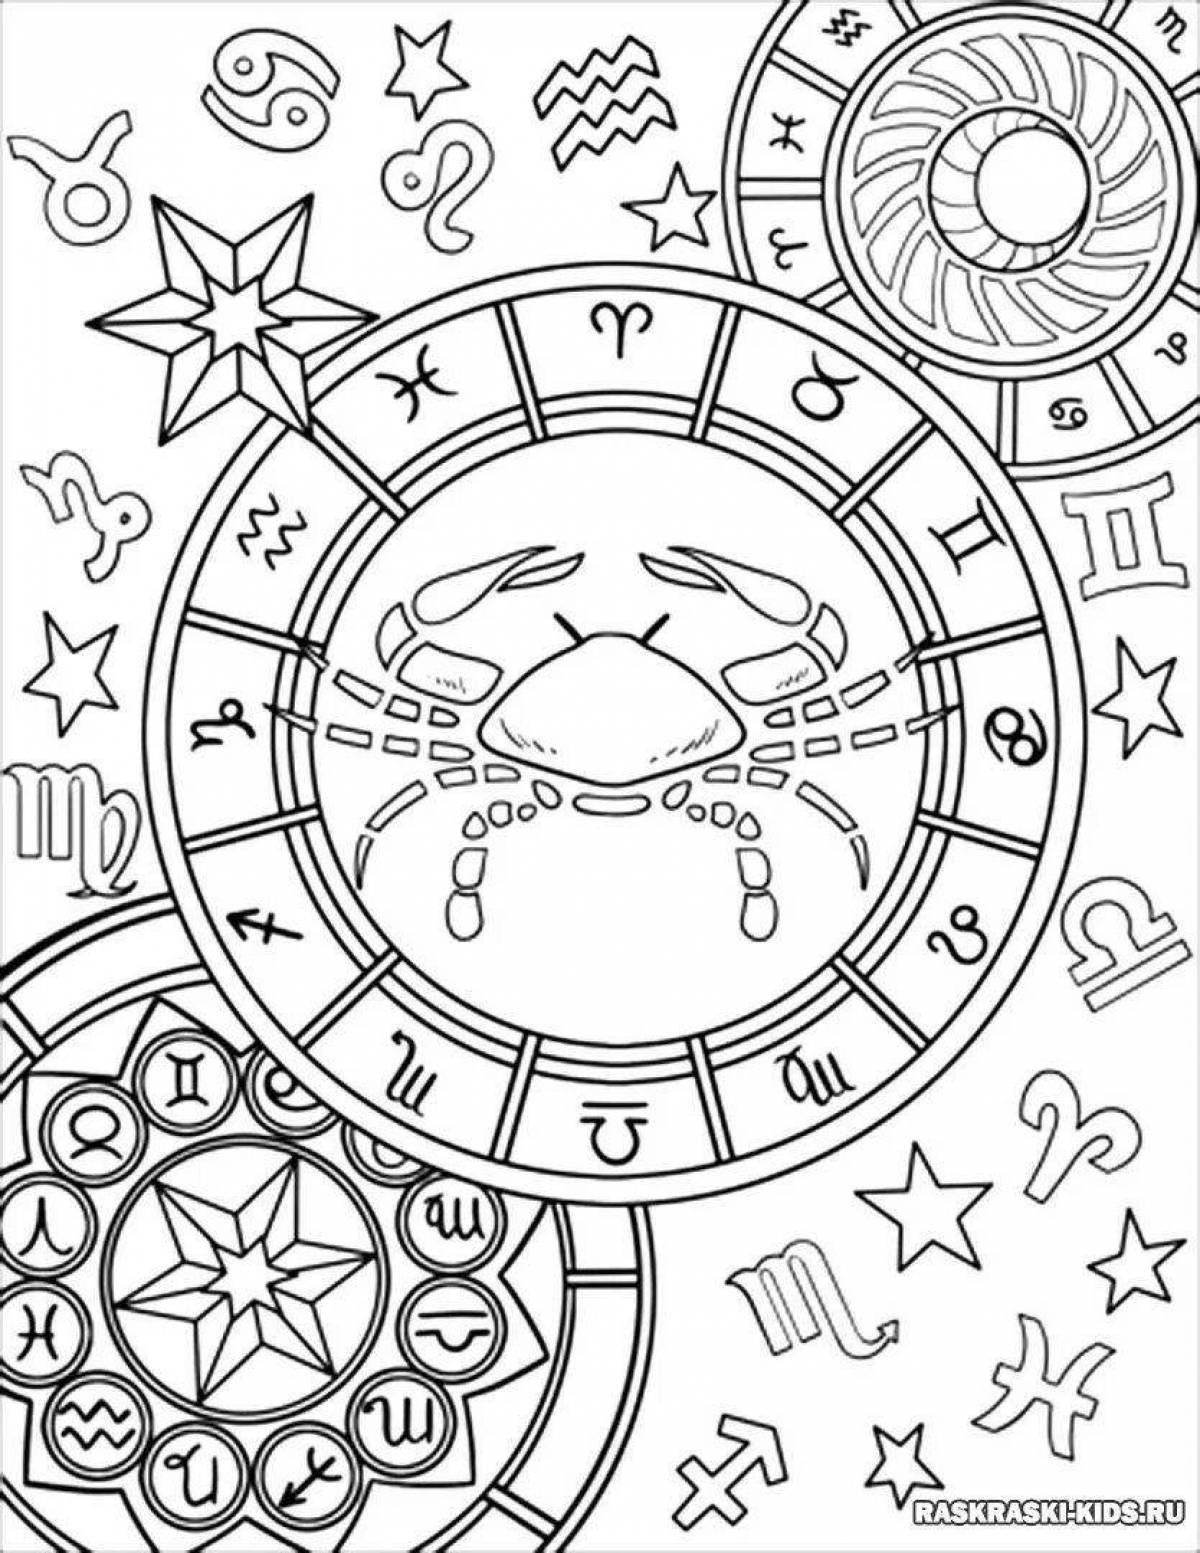 Joyful zodiac signs coloring pages for kids